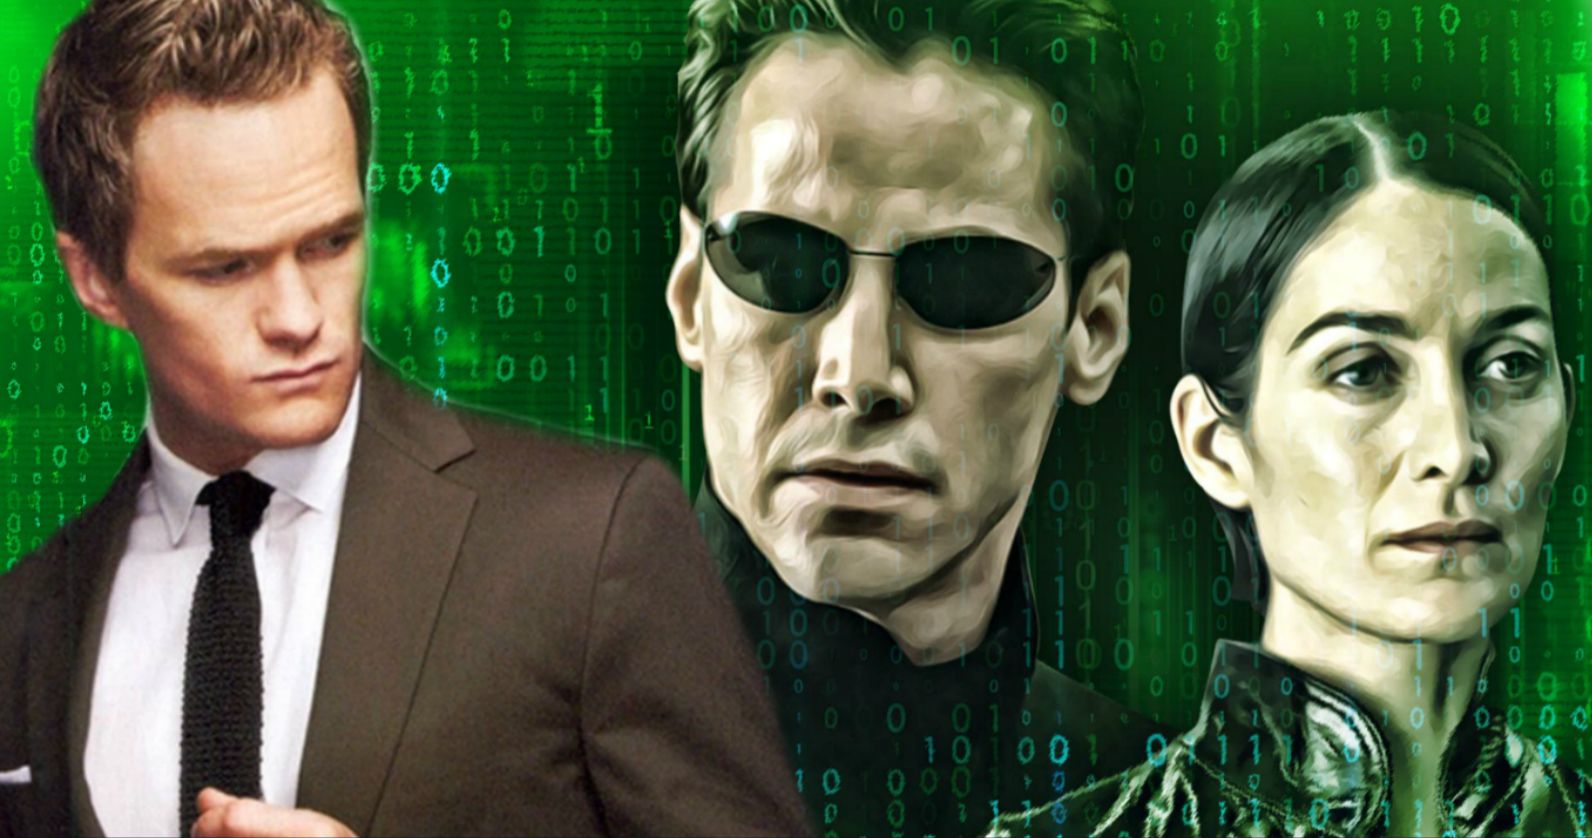 Neil Patrick Harris Only Has a Small Role in The Matrix 4, But He's Making the Most of It